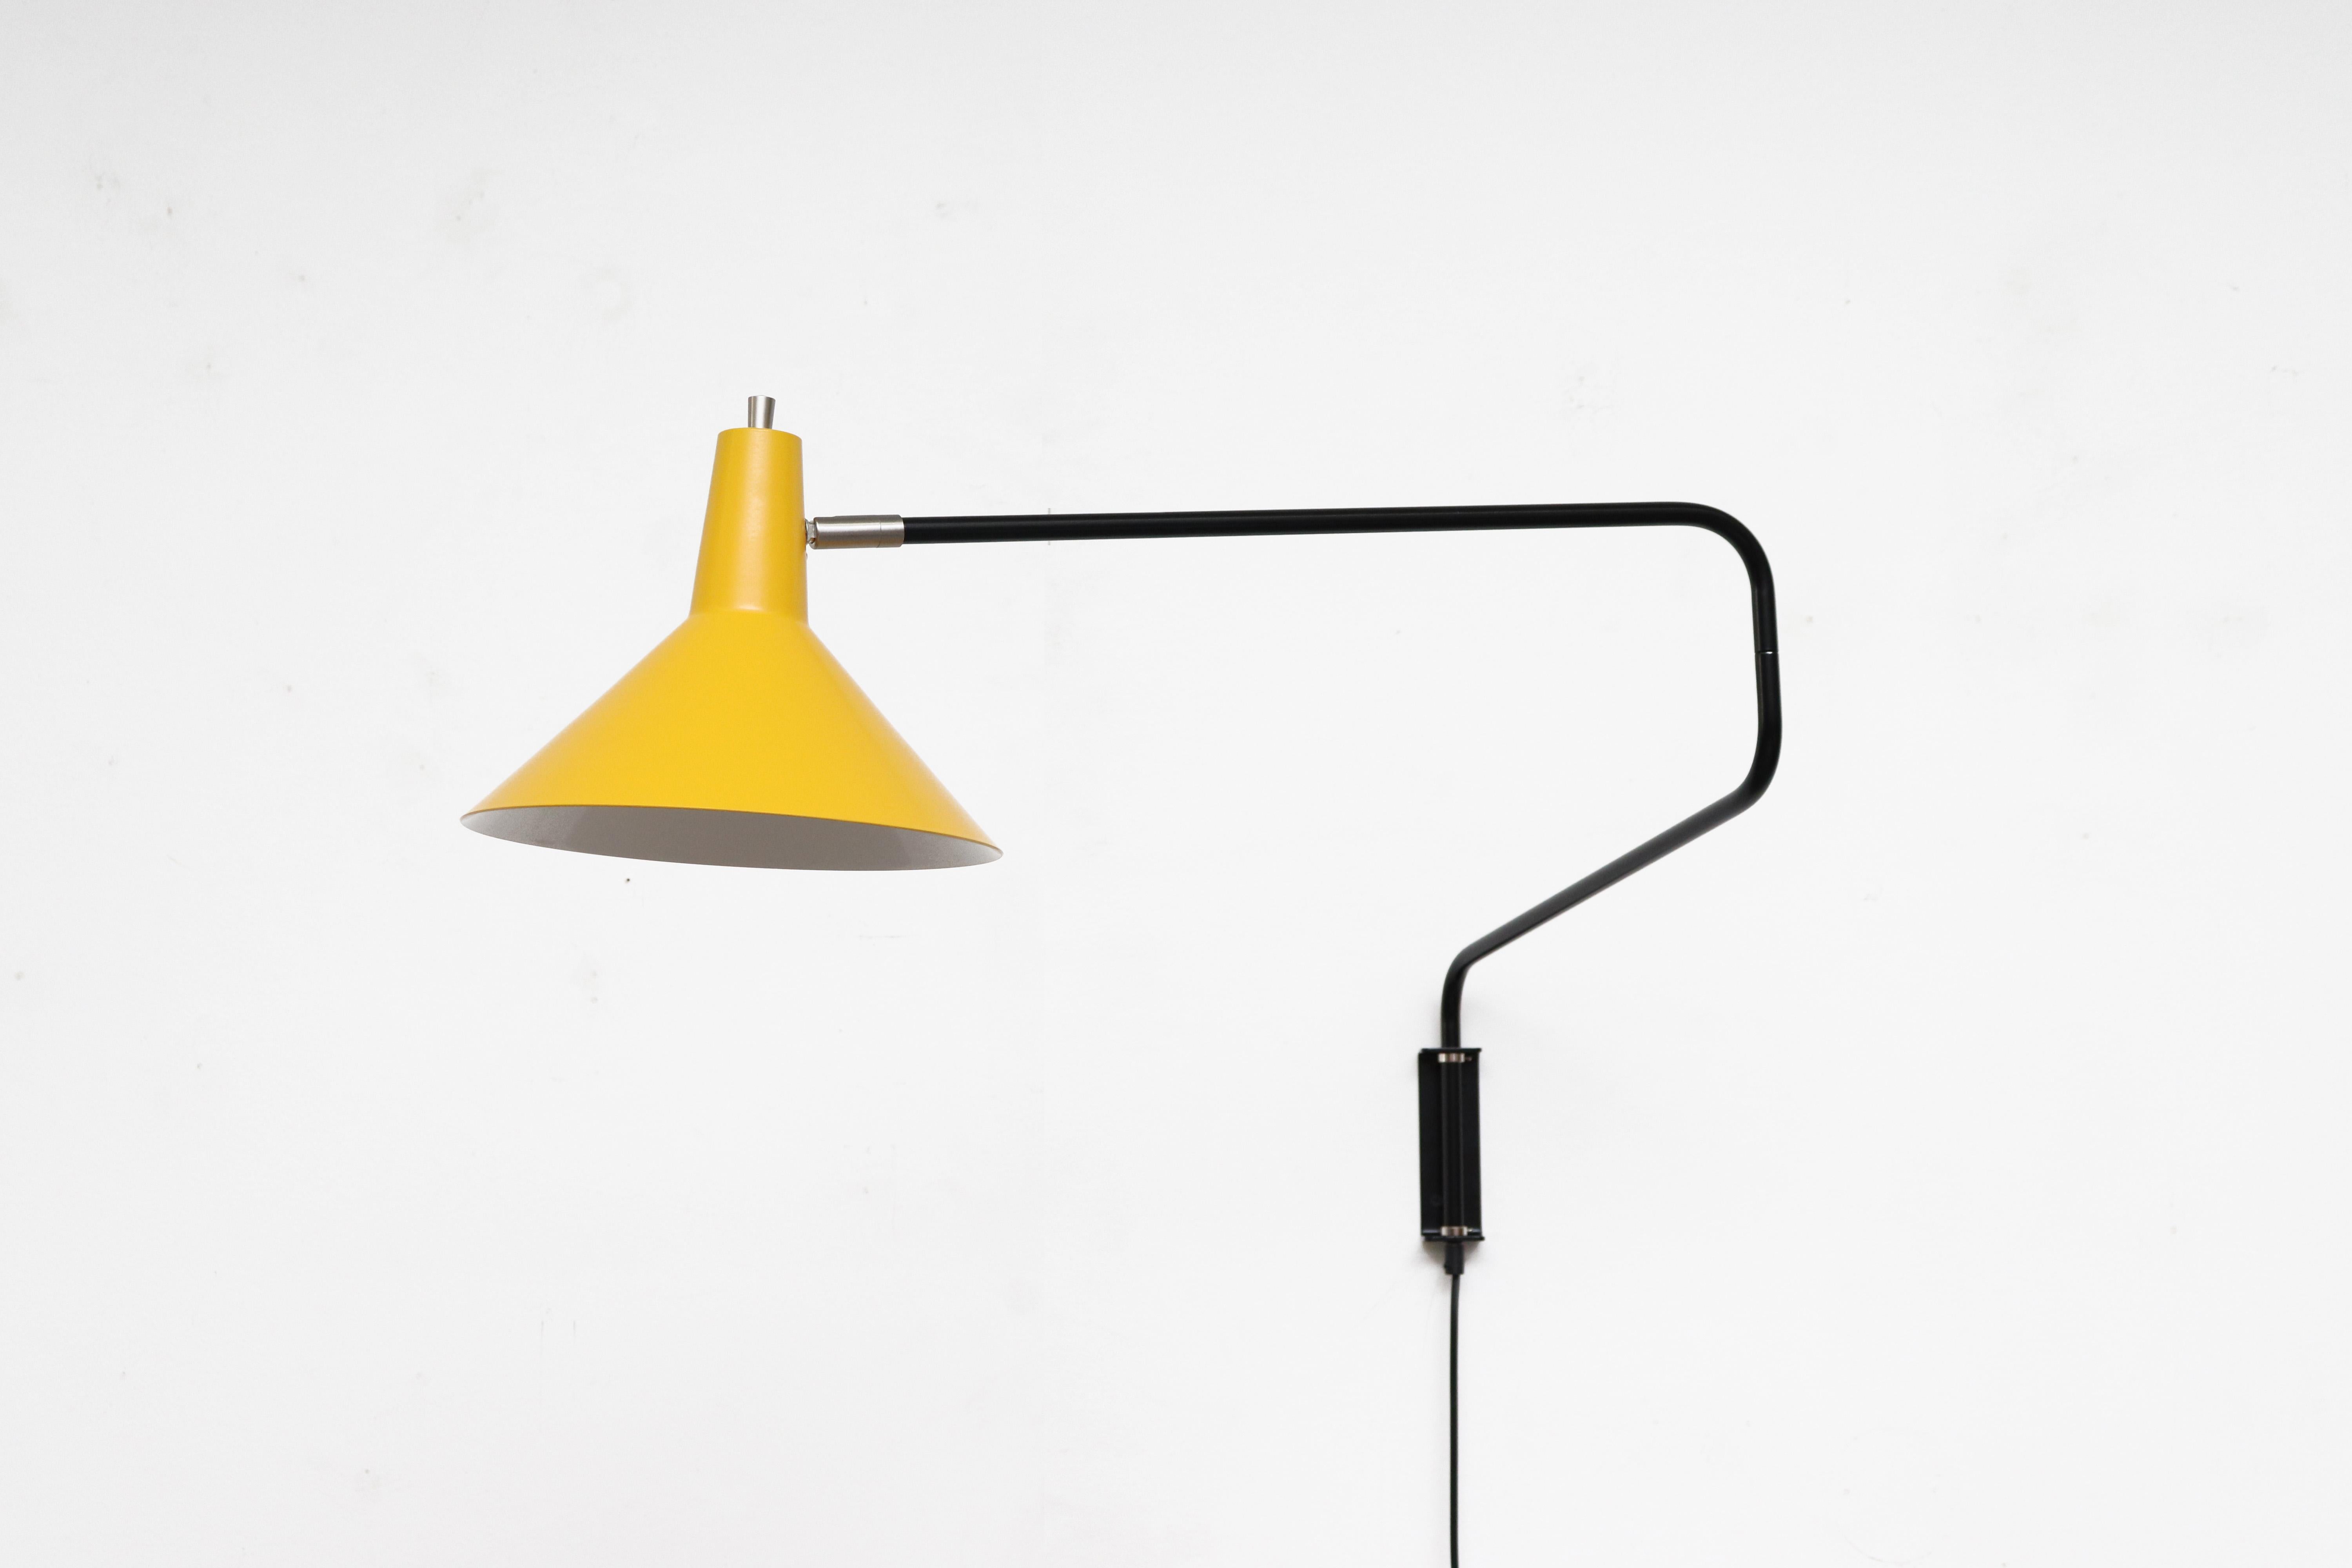 Newly re-issued Anvia 'The Paper Clip' wall lamp in yellow with black frame. Has paper clip style arm that swings to extend or retract for versatile use and tilting/rotating shade. More colors available, listed separately.